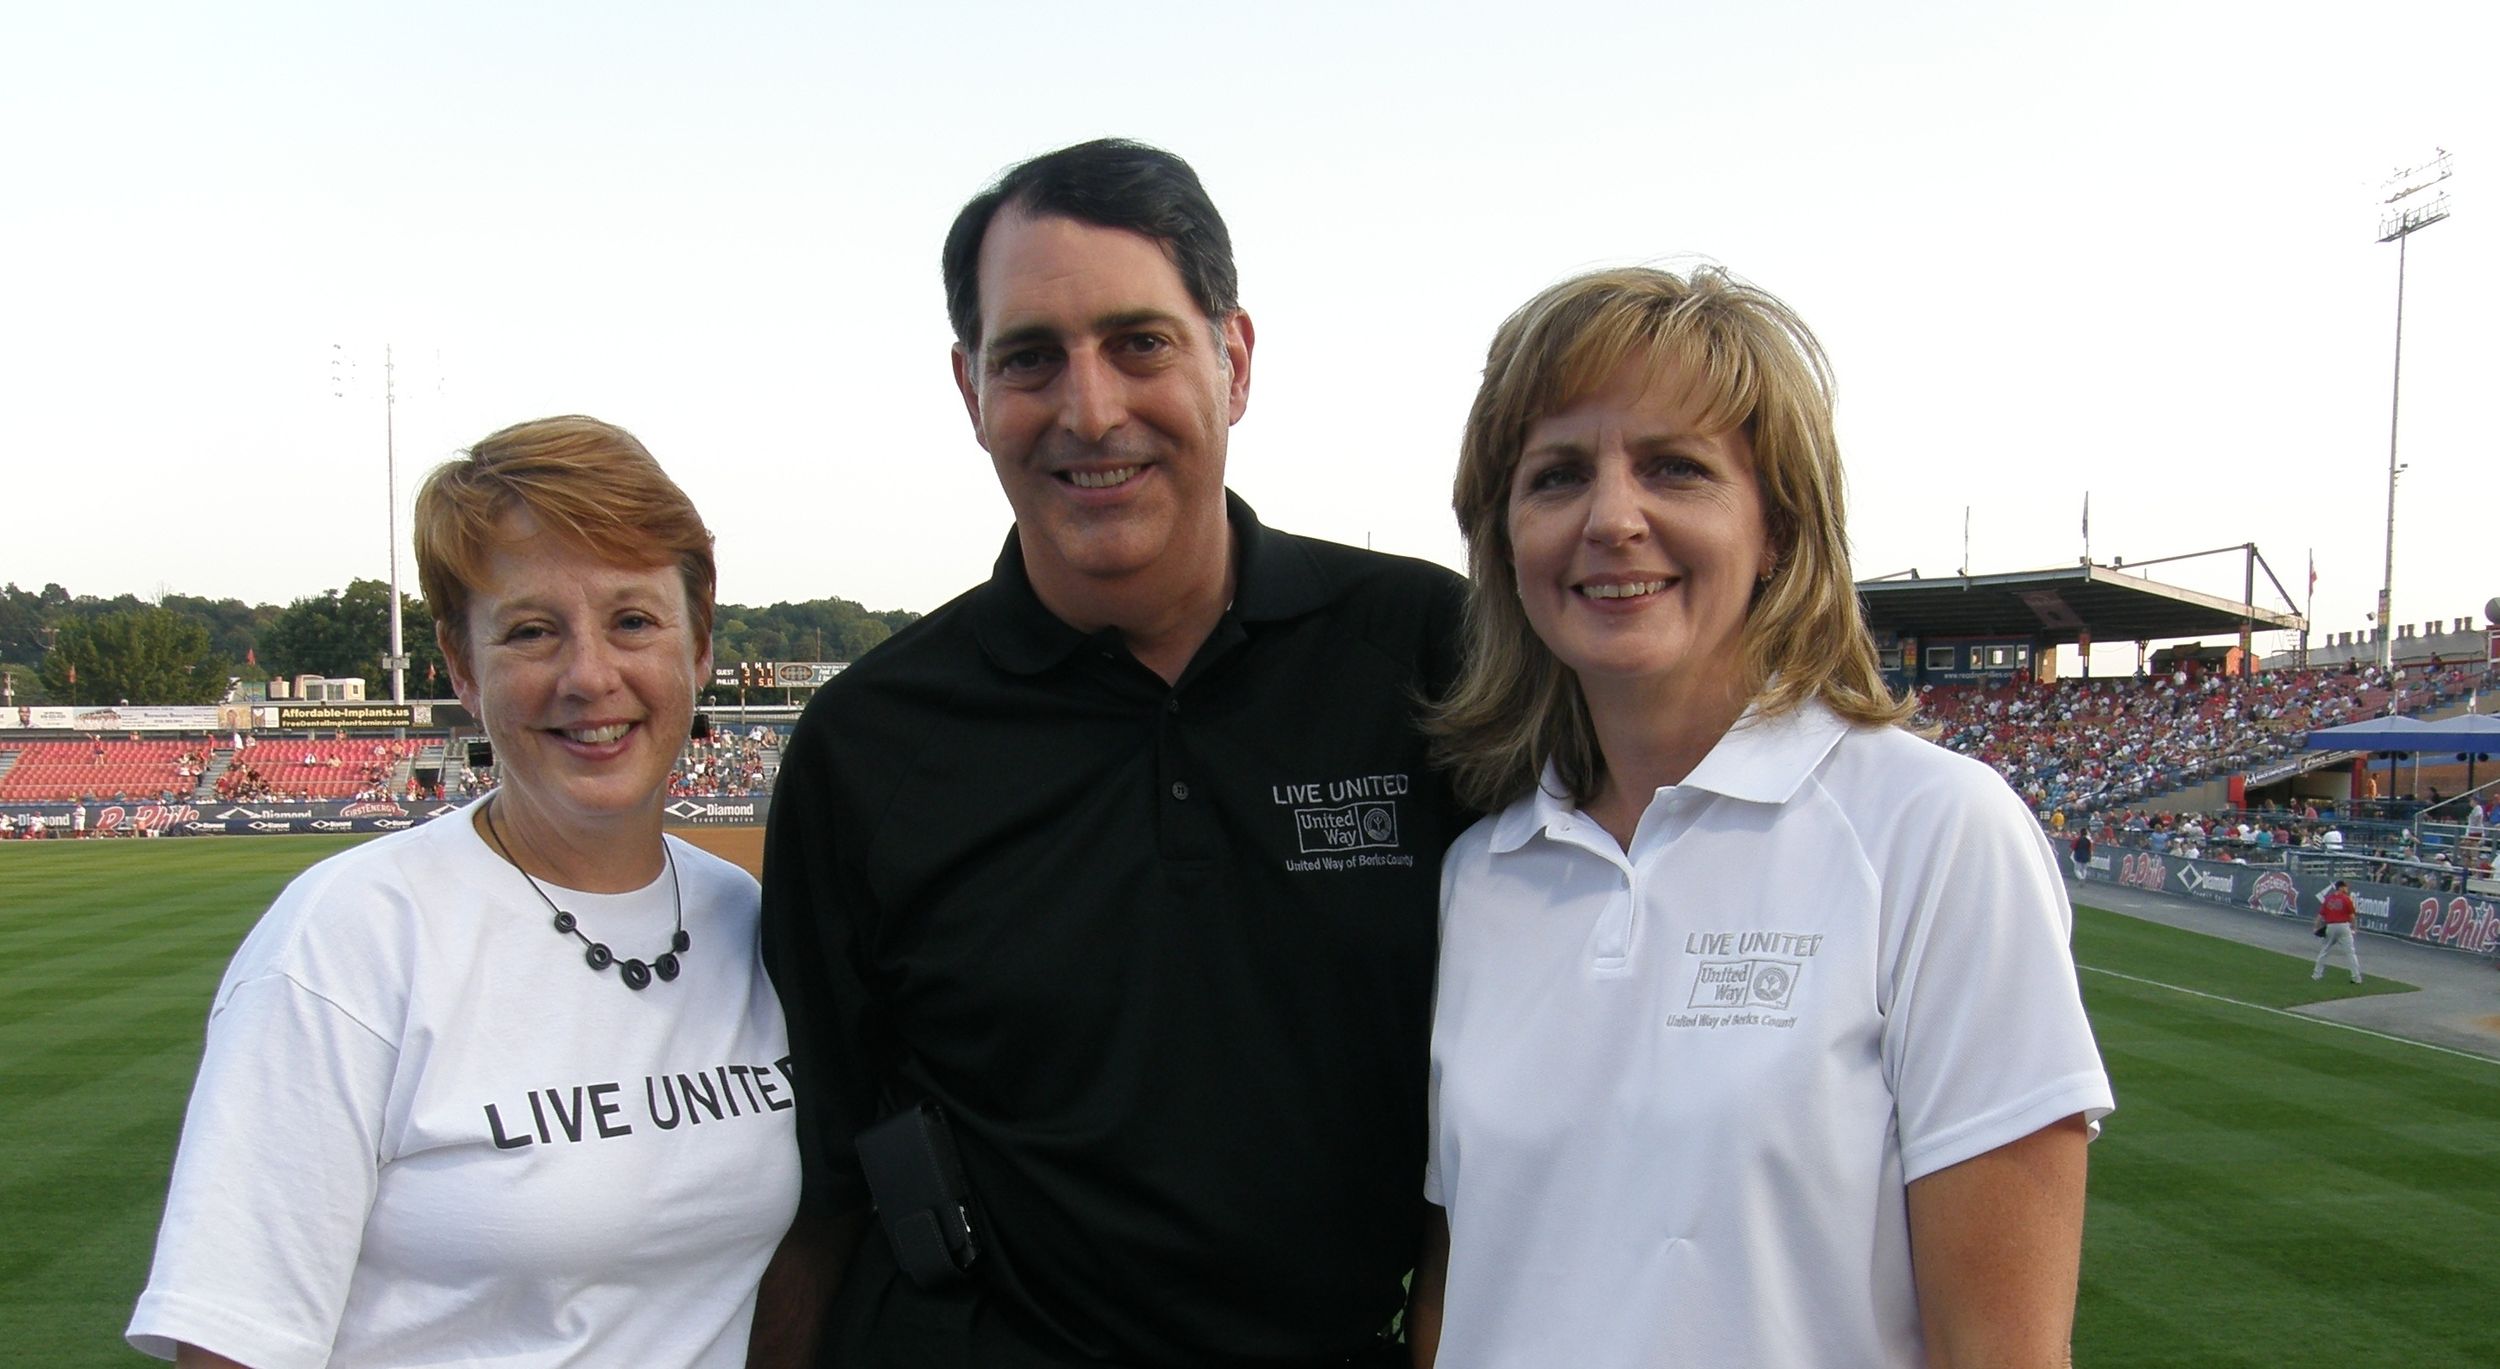 Penske Executive Encourages United Way Support